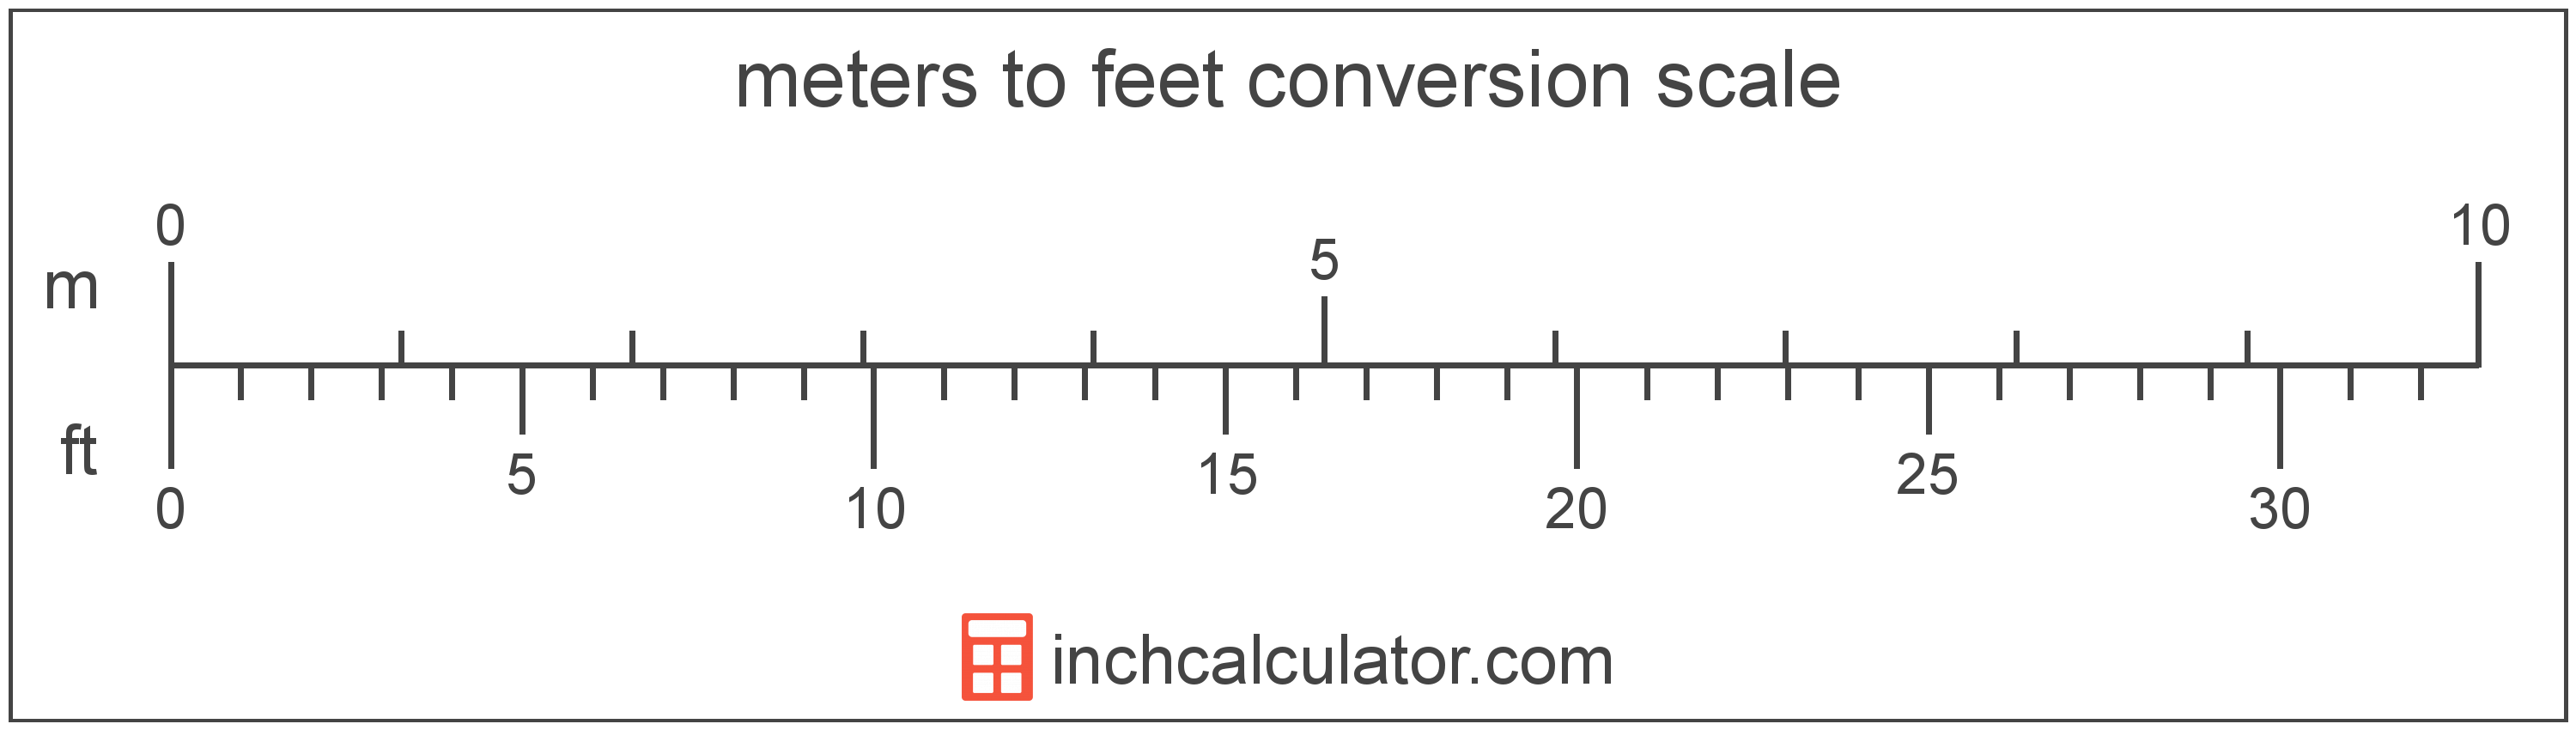 Measurement Conversion Chart Feet To Meters